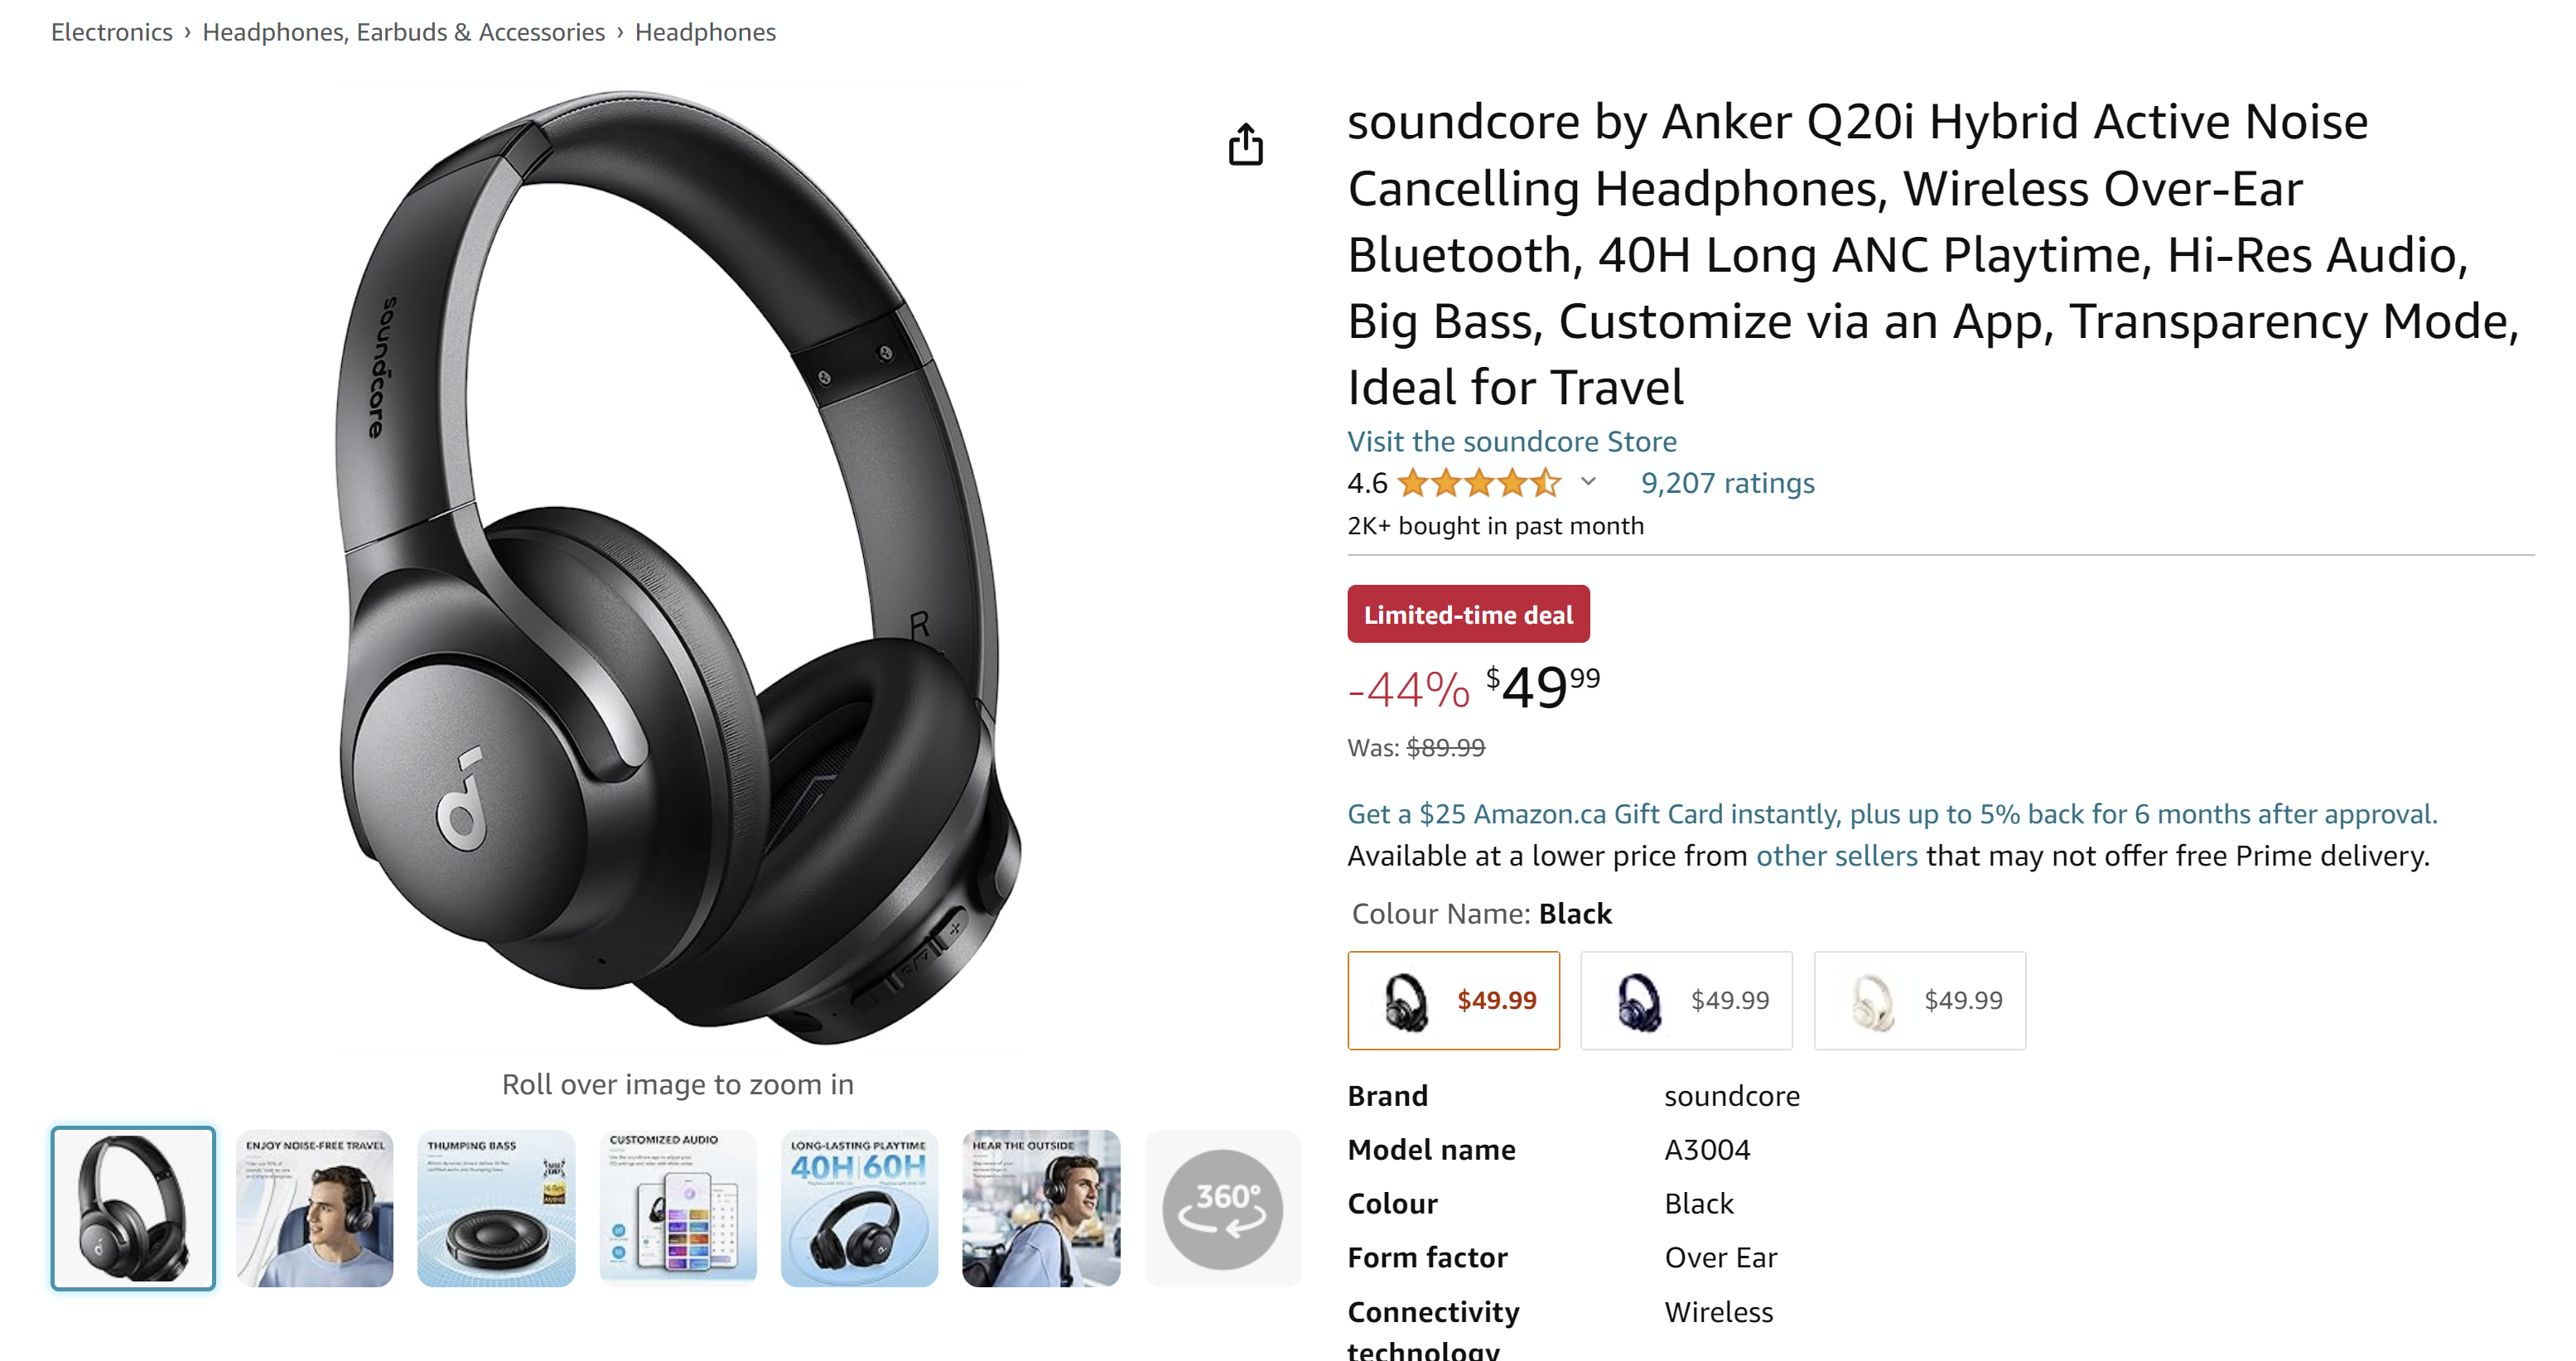 soundcore by Anker Q20i Hybrid Active Noise Cancelling Headphones